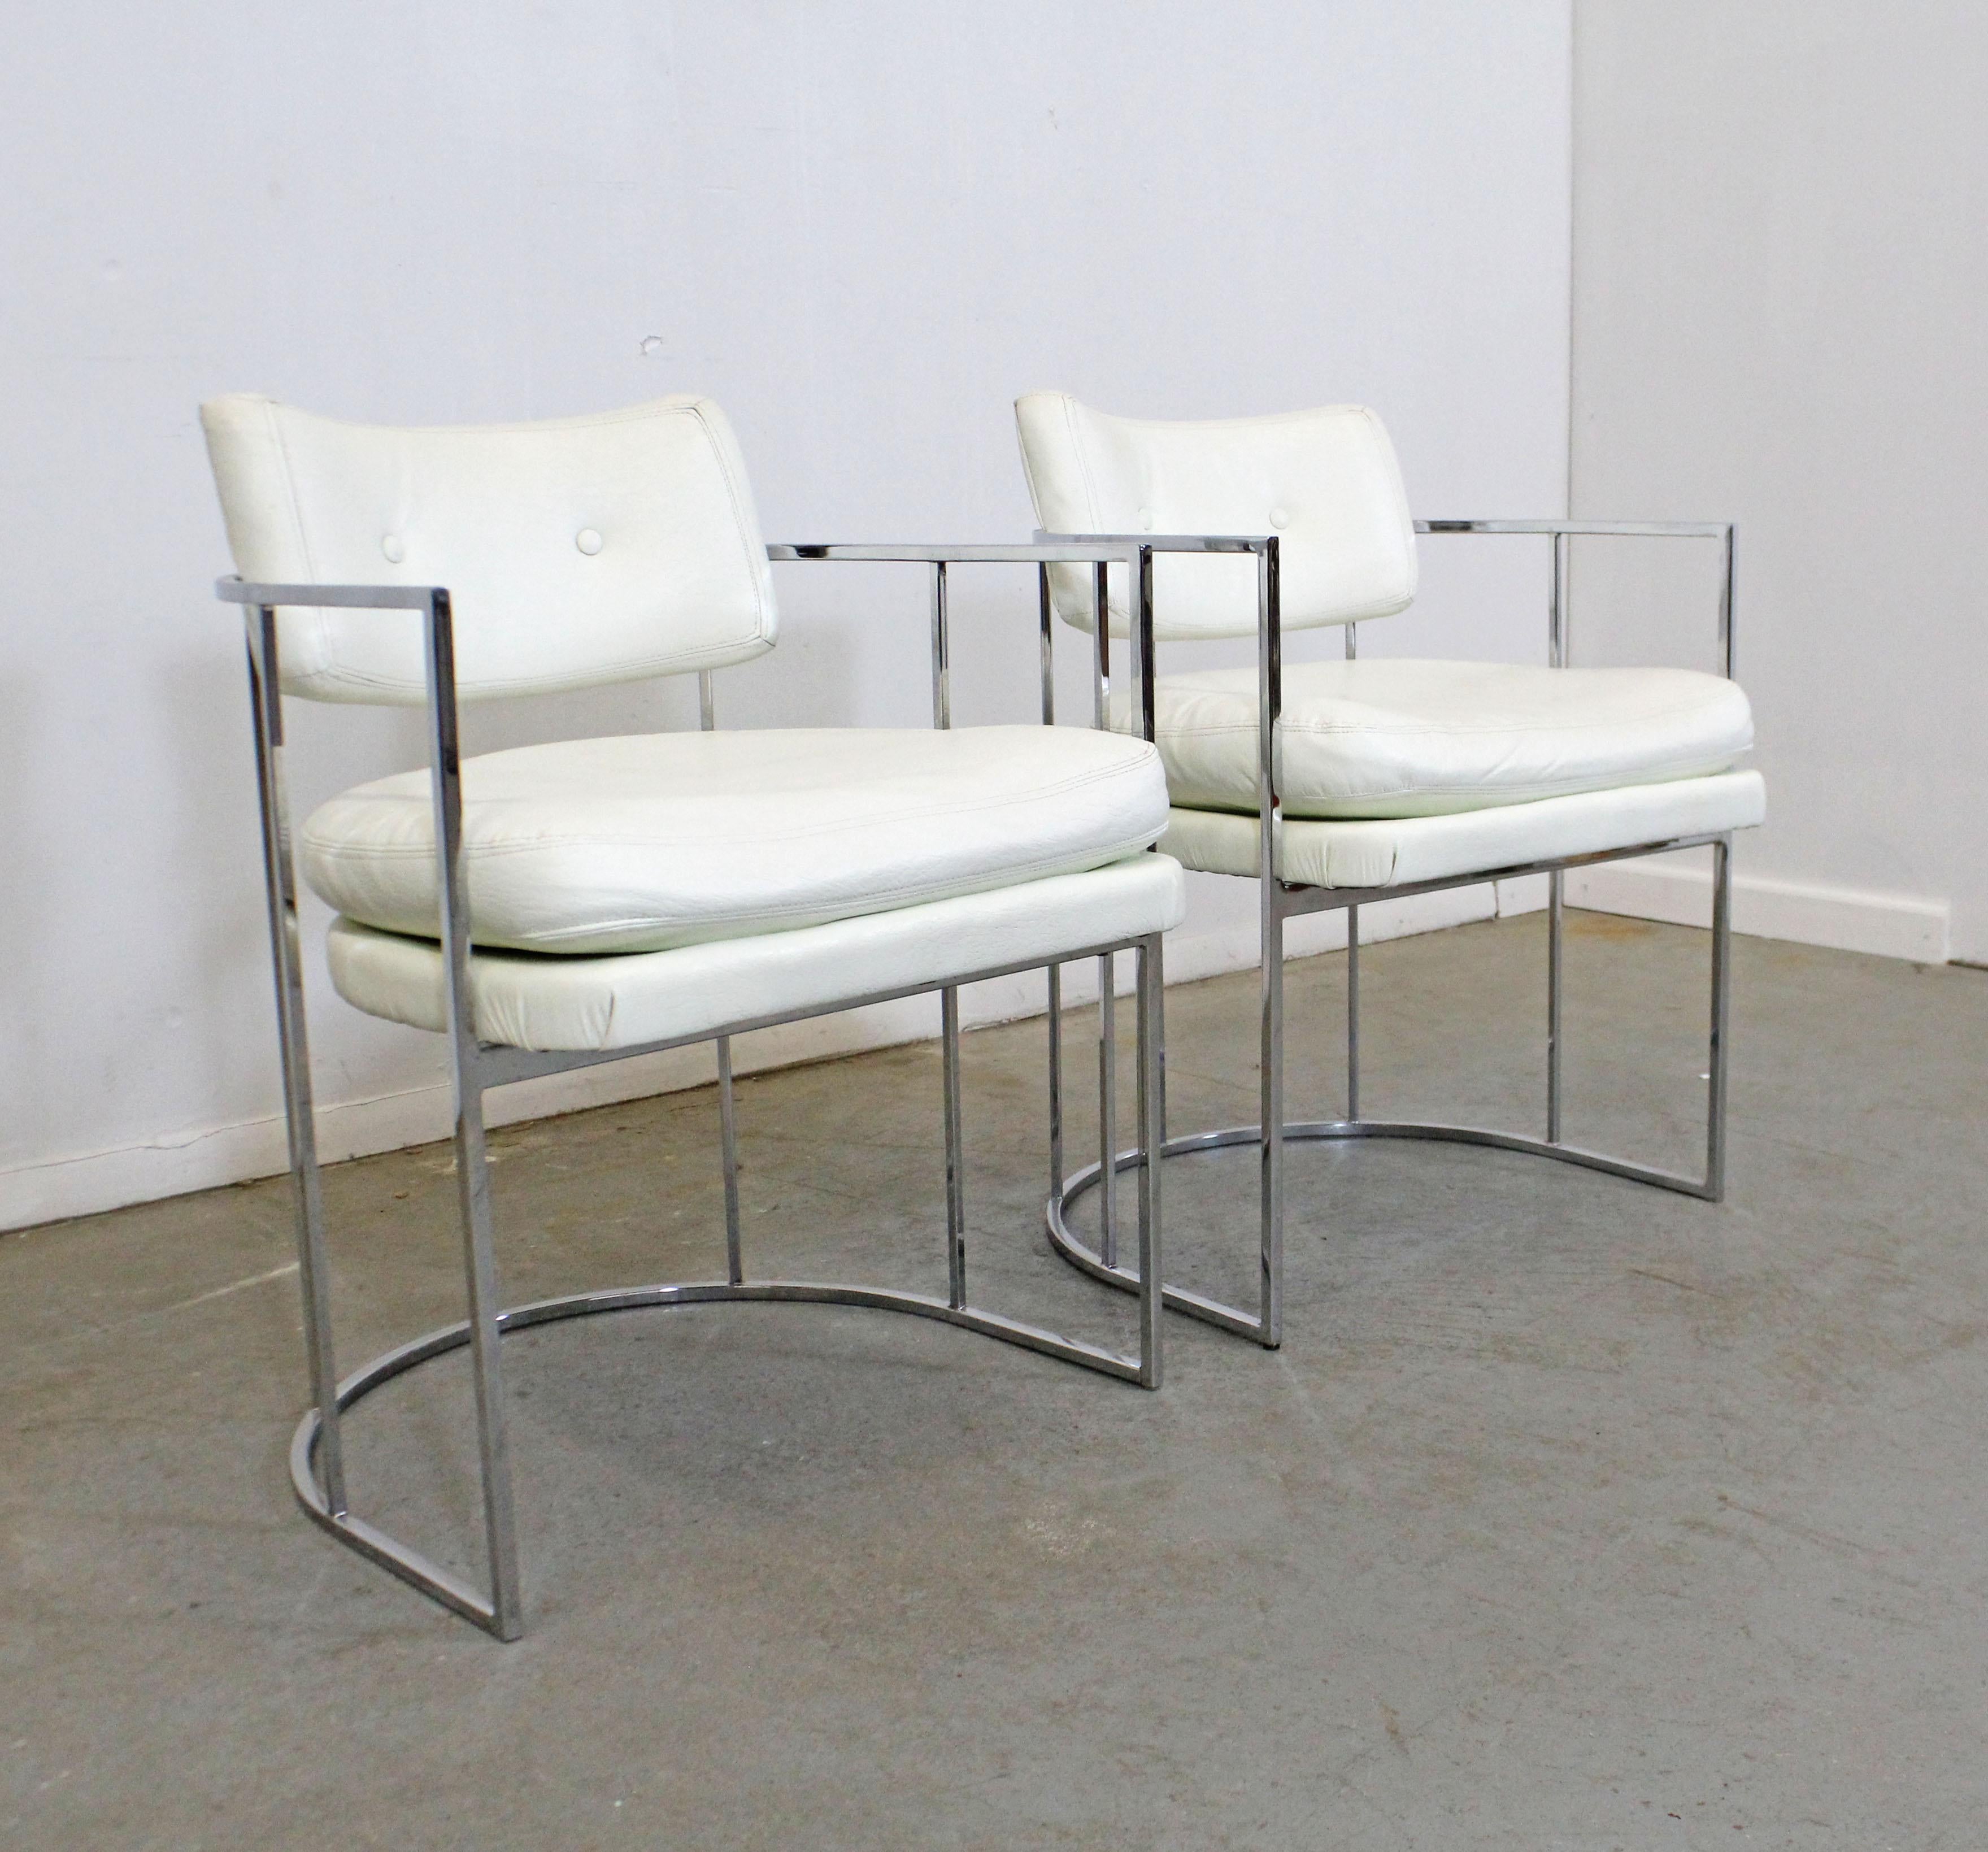 American Pair of Mid-Century Modern Milo Baughman for Thayer Coggin Chrome Dining Chairs